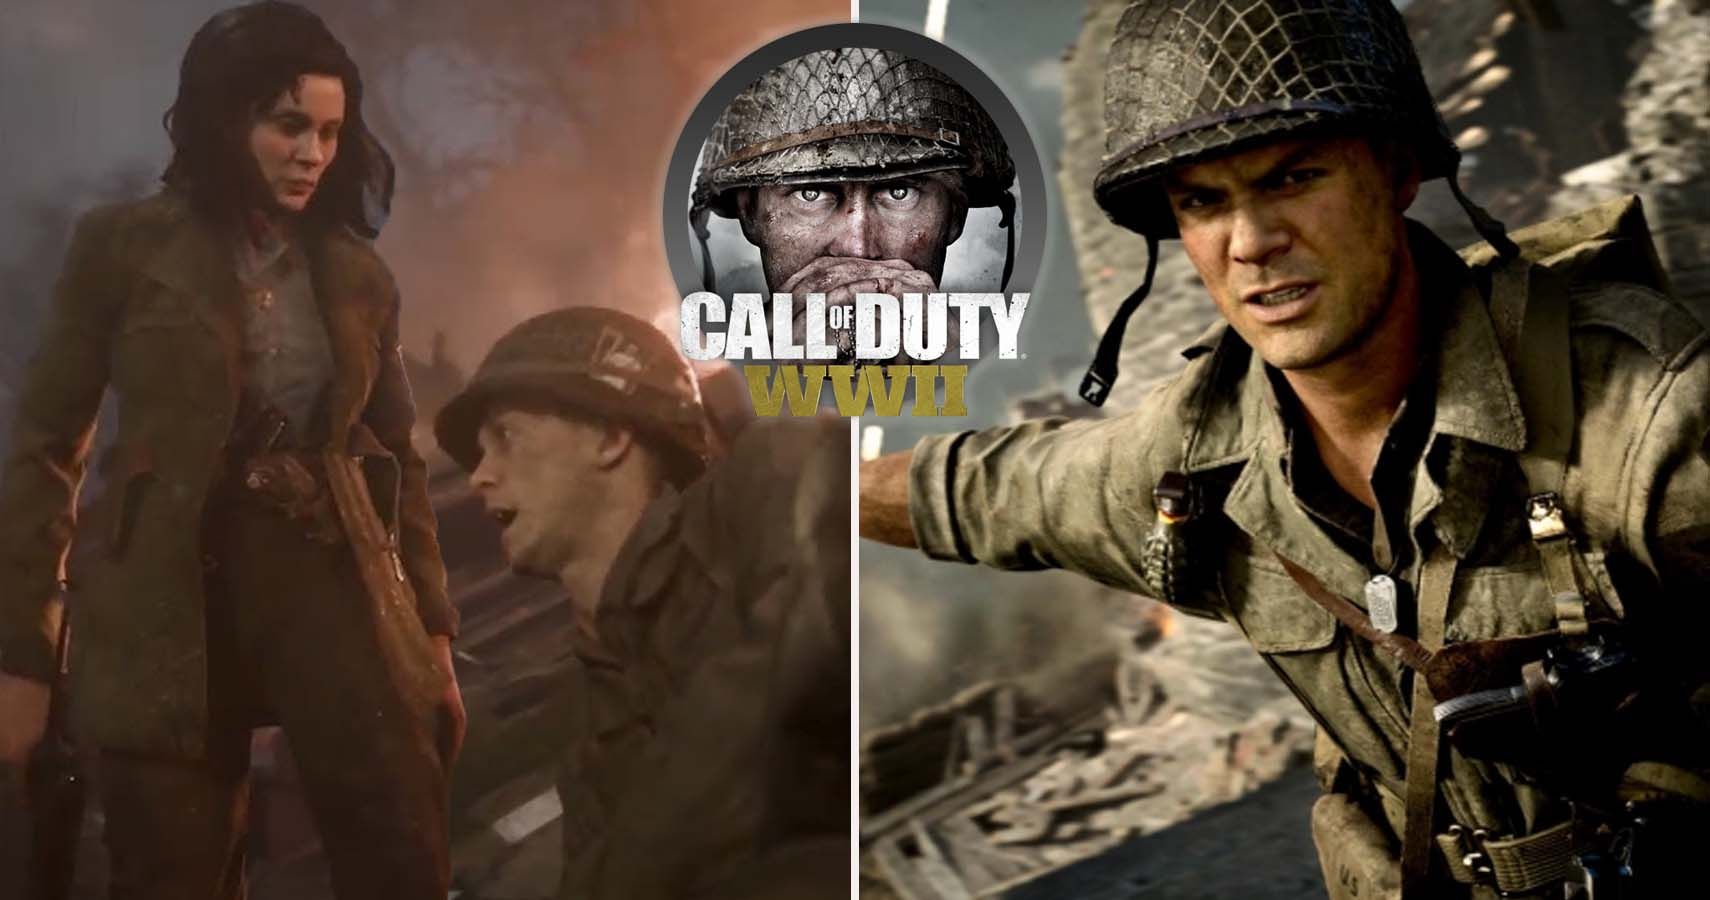 How long is the Call of Duty ww2 single player campaign?